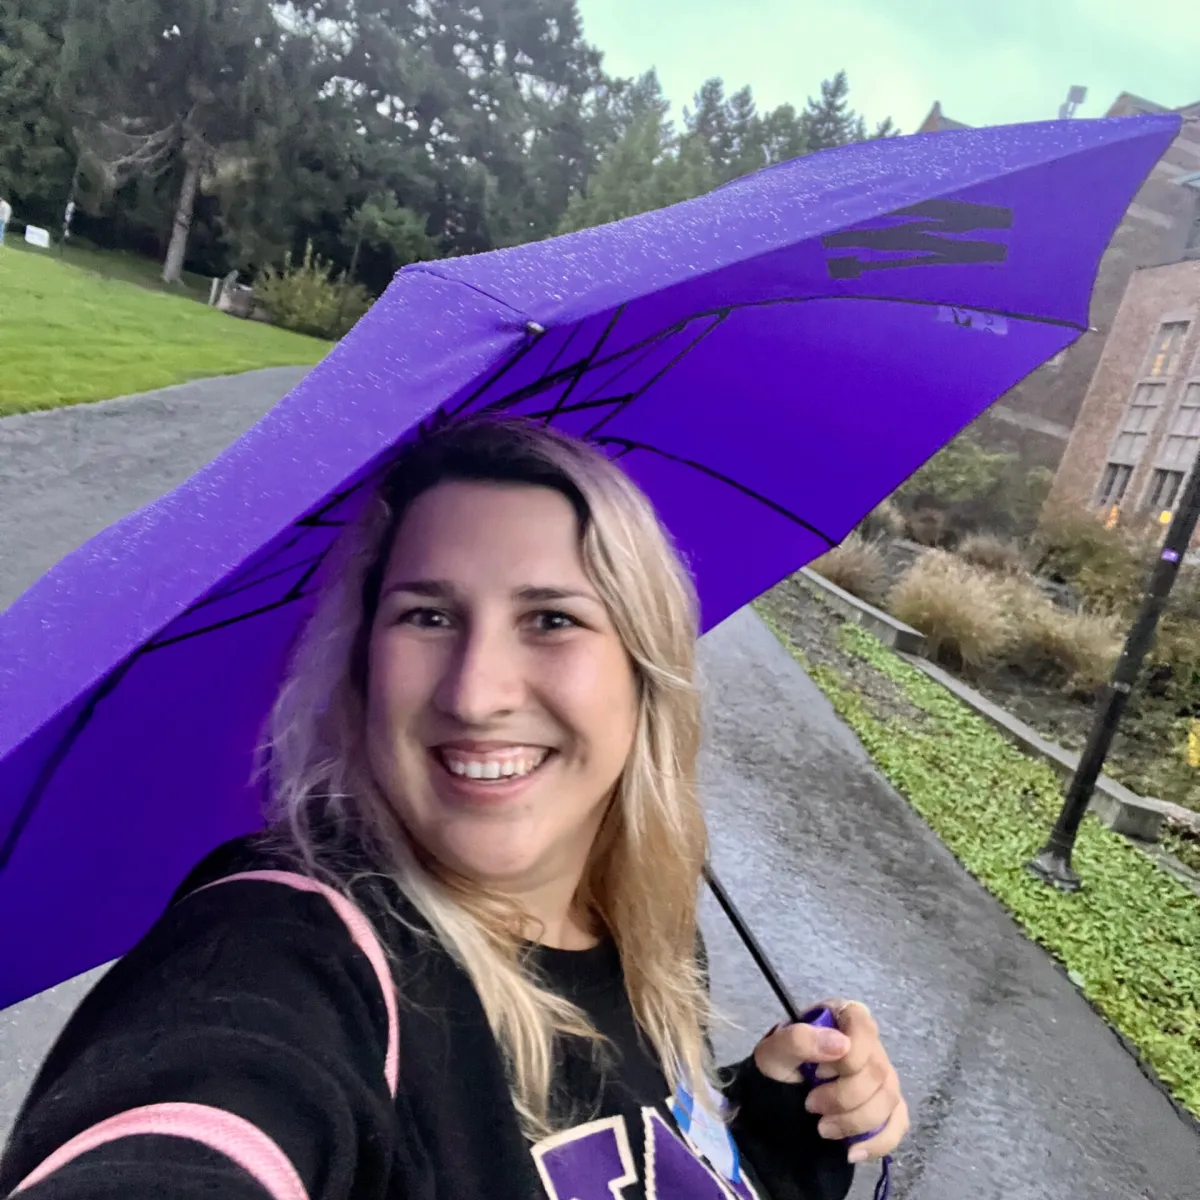 Kate Glazko, a white woman in a UW sweatshirt grinning while holding a purple umbrella in the rain.